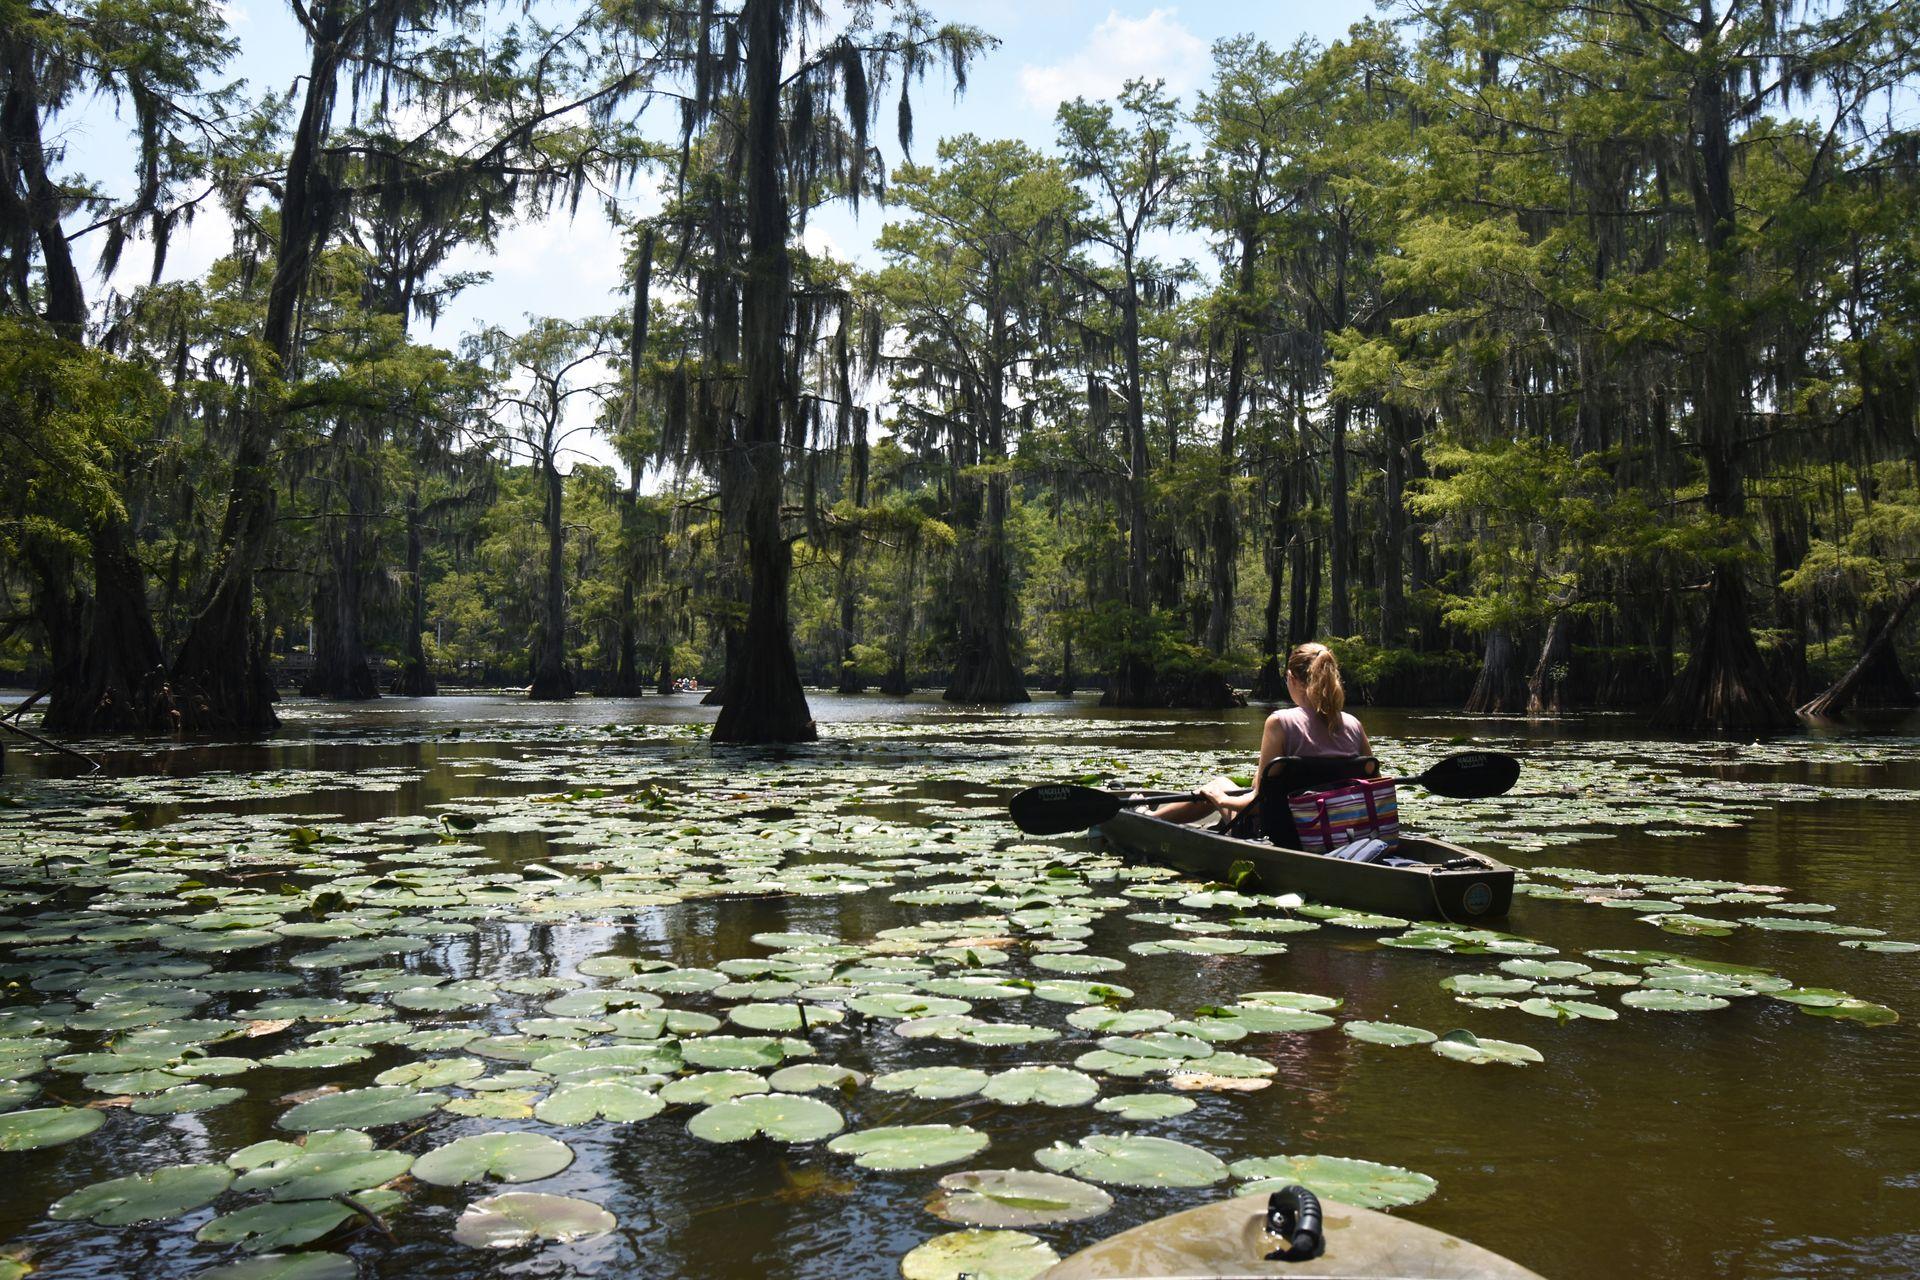 Lydia facing away, sitting in her canoe, surrounded by lily pads in the water of Mill Pond.